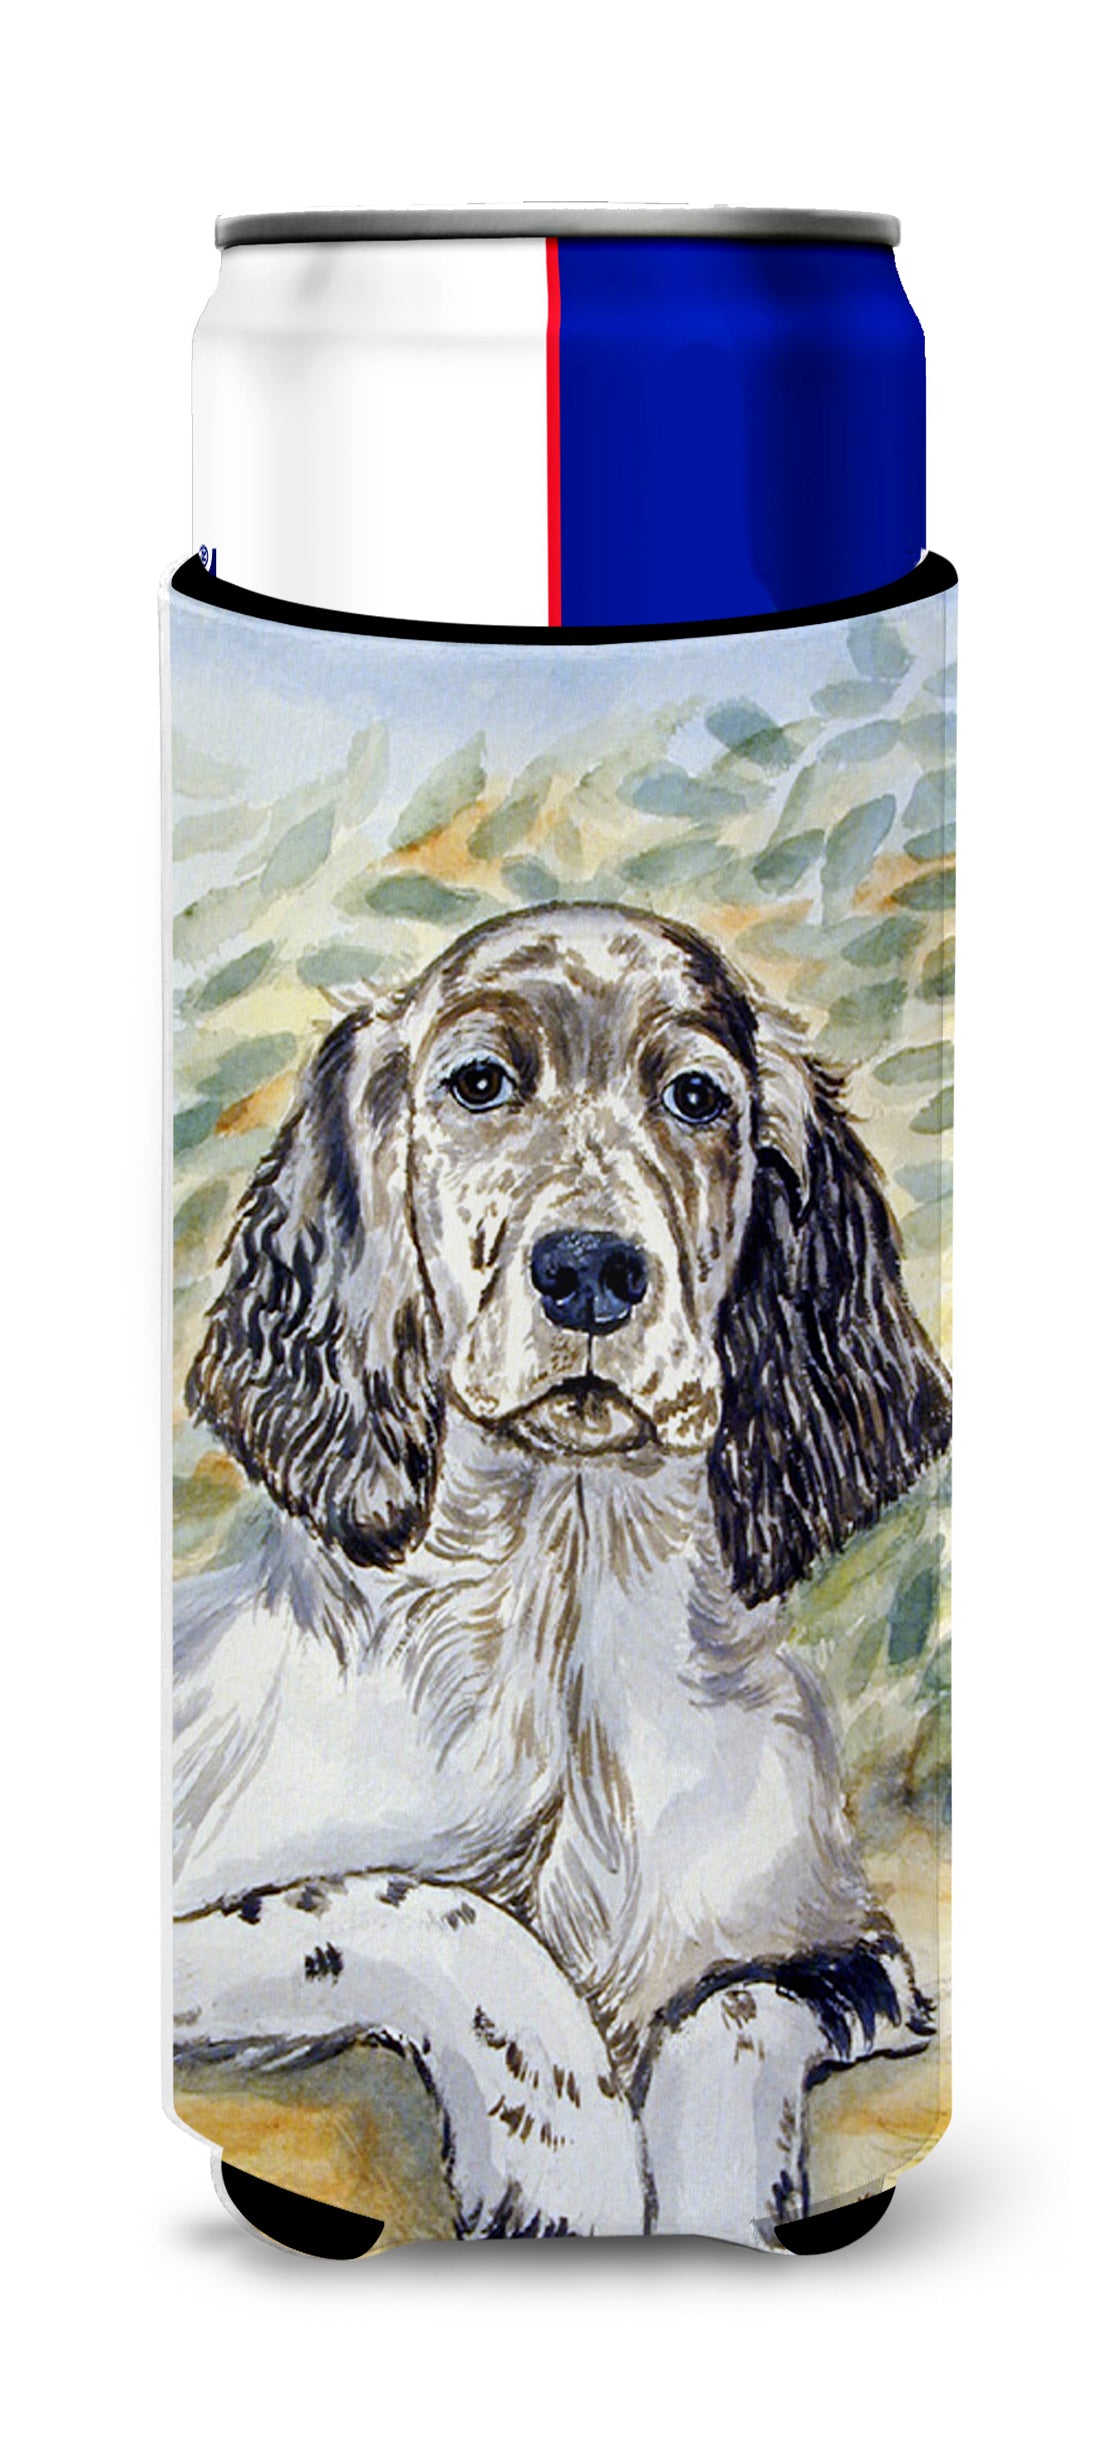 English Setter Patience Ultra Beverage Insulators for slim cans 7065MUK.